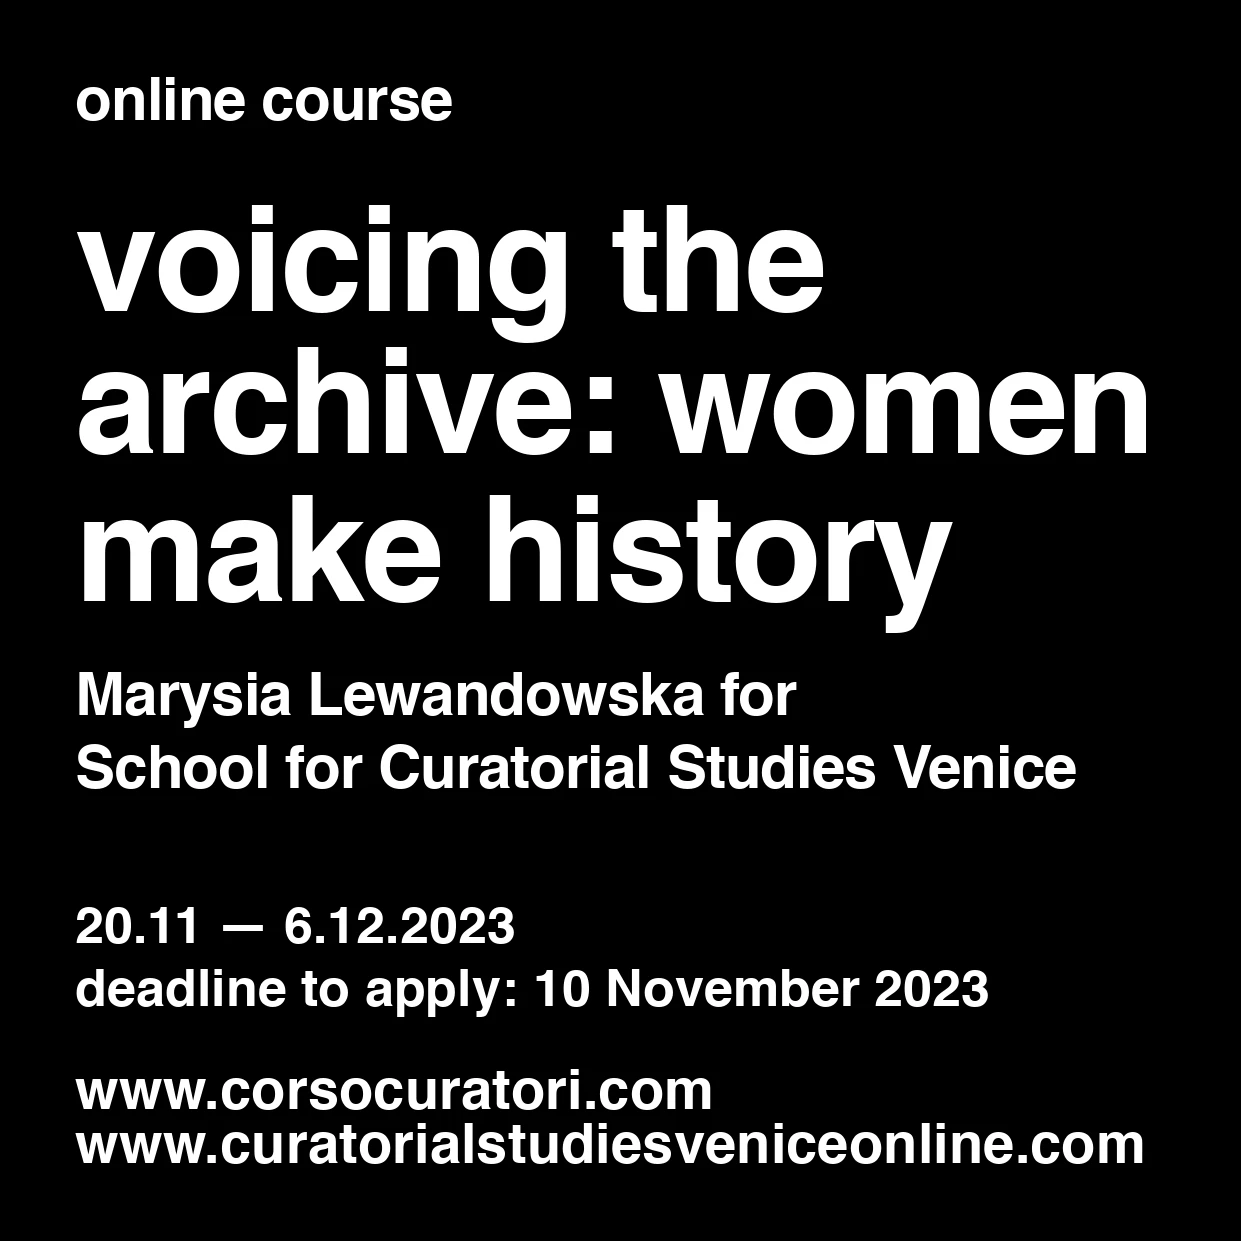 VOICING THE ARCHIVE: WOMEN MAKE HISTORY.